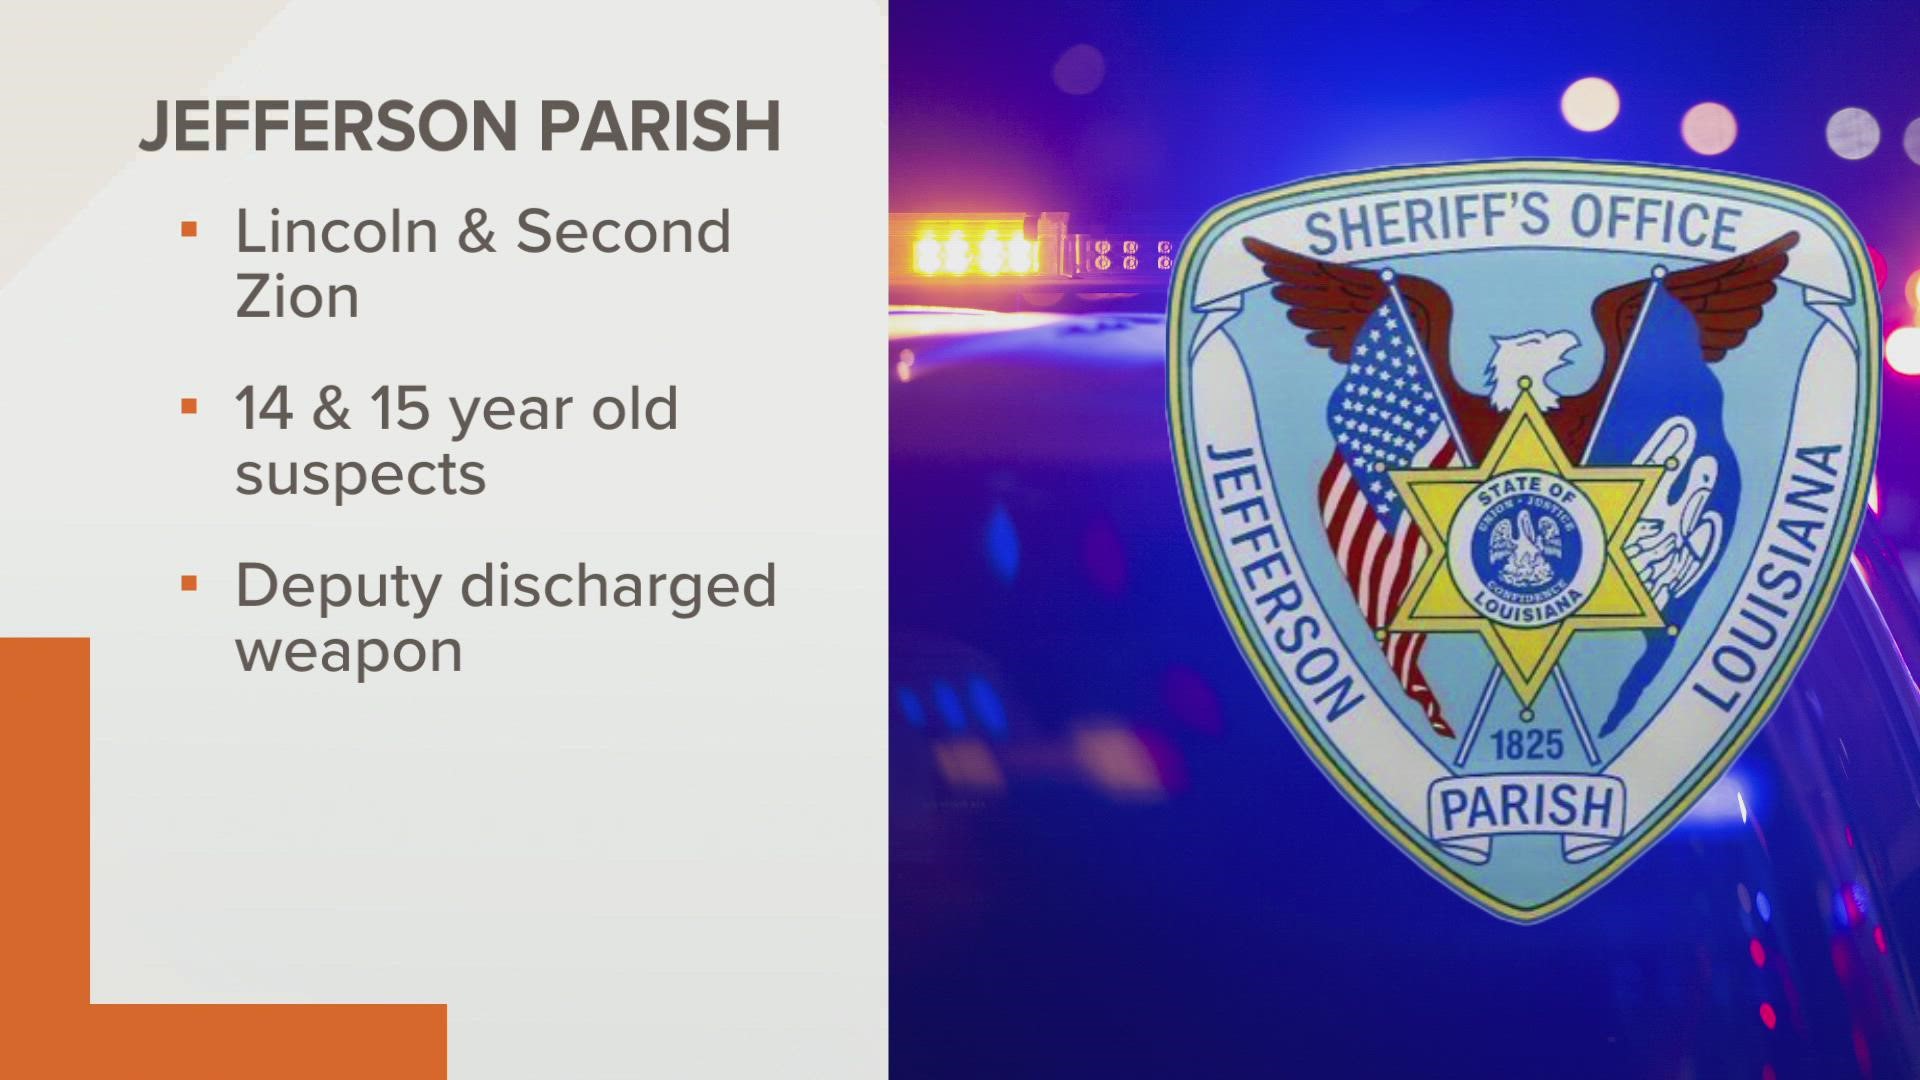 A JPSO deputy discharged his firearm while engaging with two juveniles. Neither juvenile was hit or wounded by gunfire.